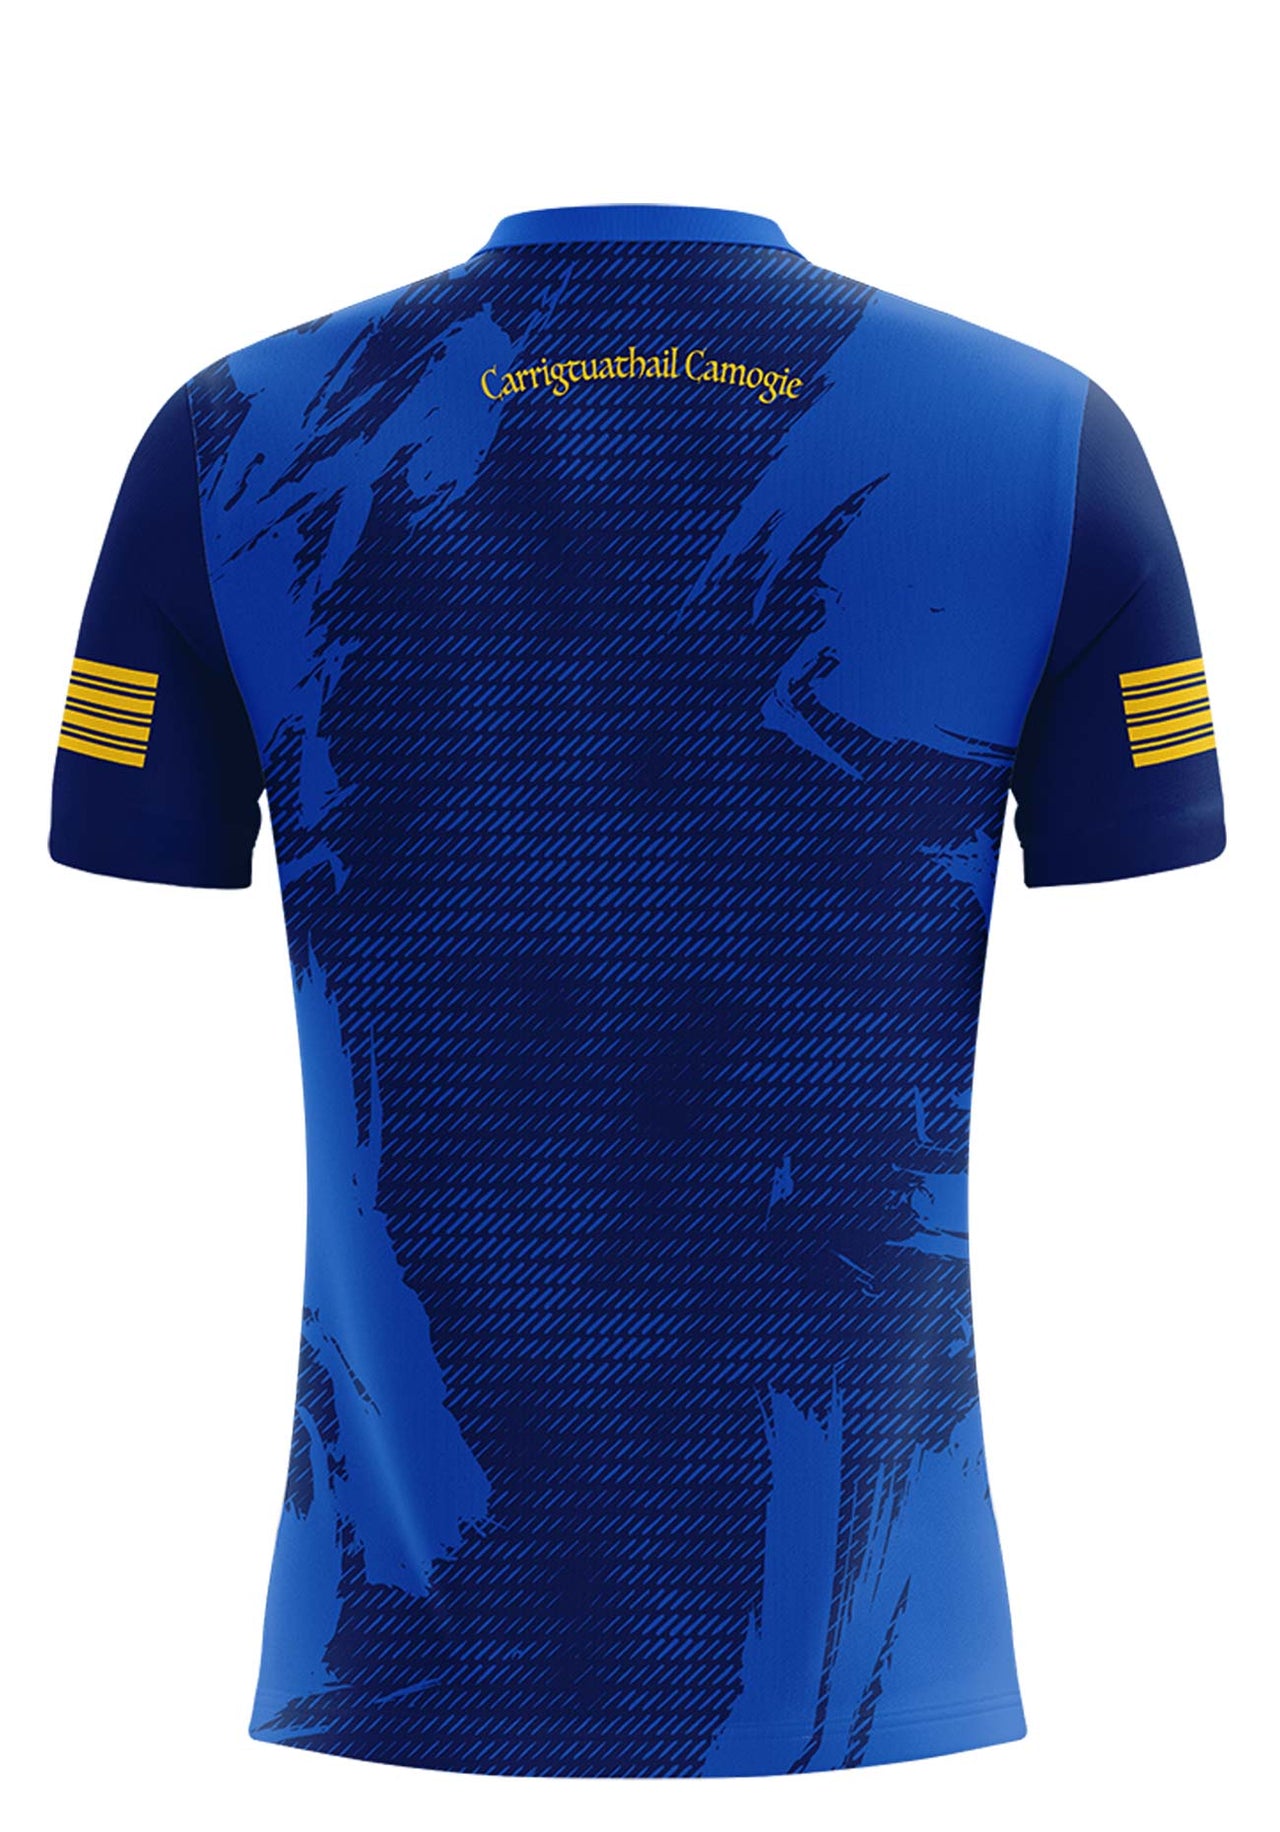 Carrigtwohill Camogie Training Jersey Player Fit Adult